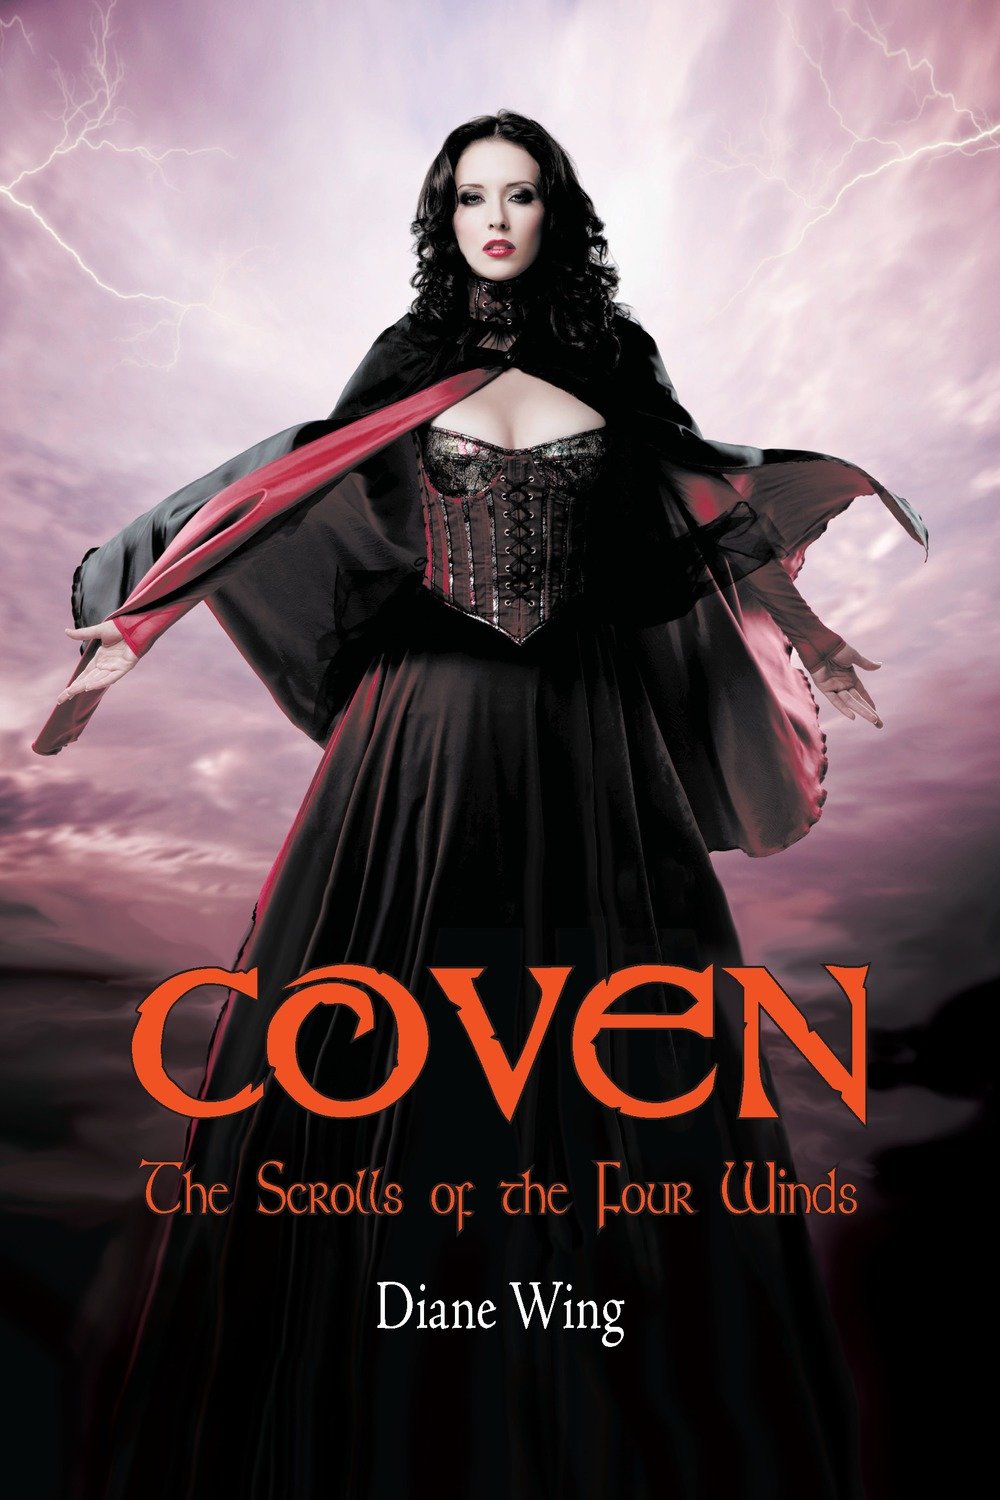 Coven: The Scrolls of the Four Winds